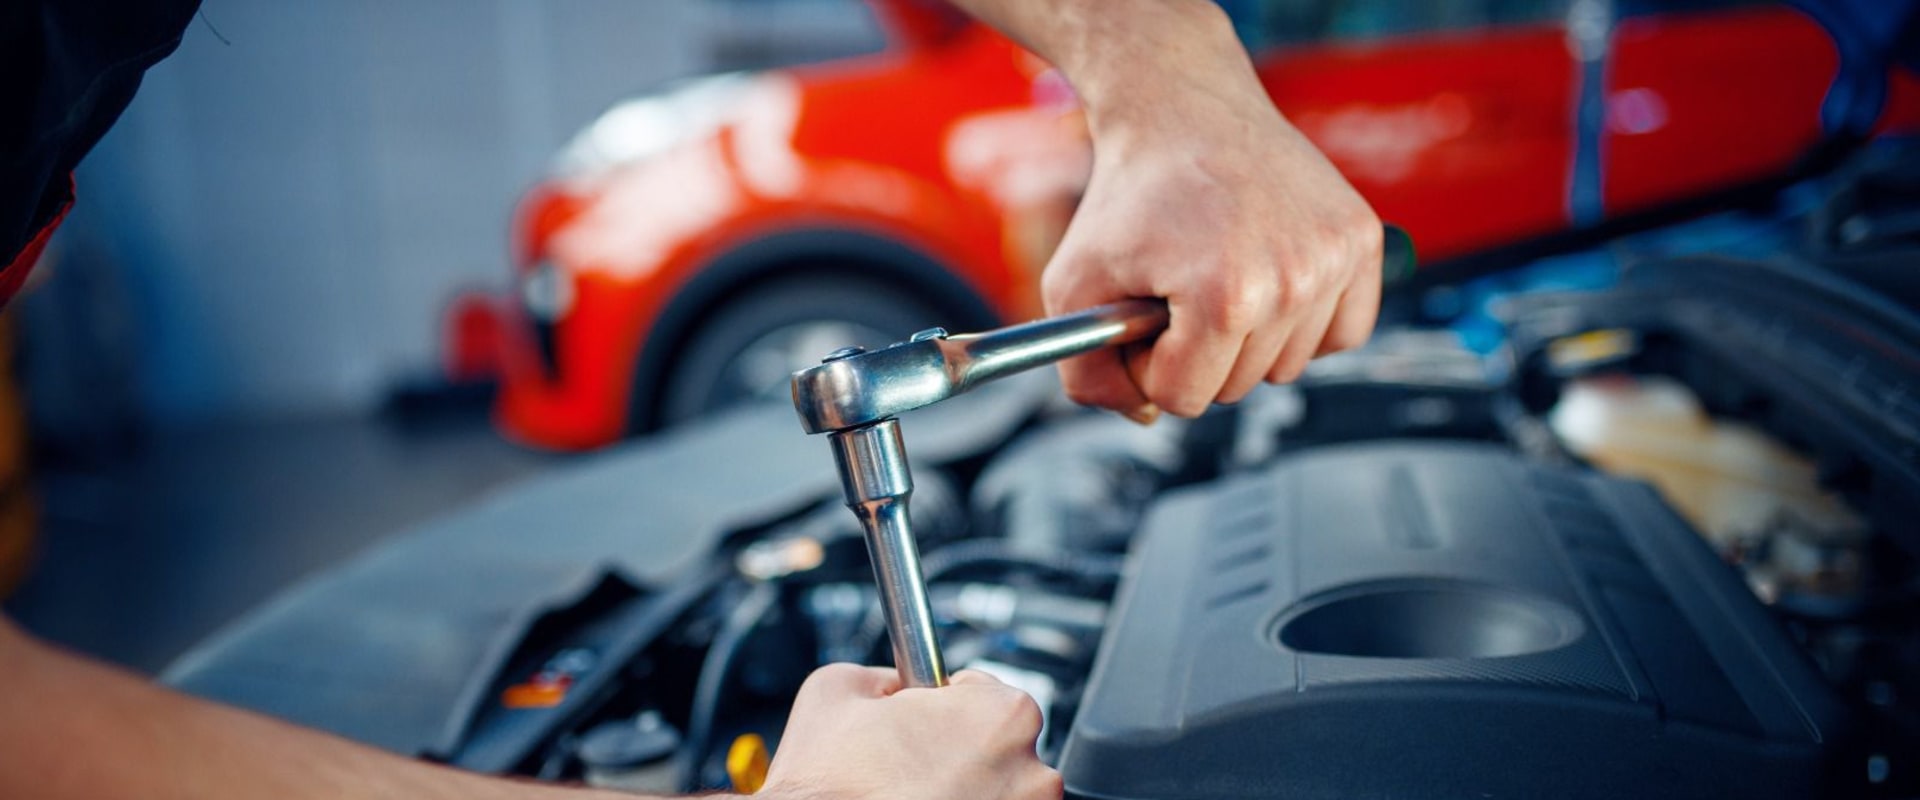 10 Automotive Maintenance and Repair Tasks You Can Do Yourself